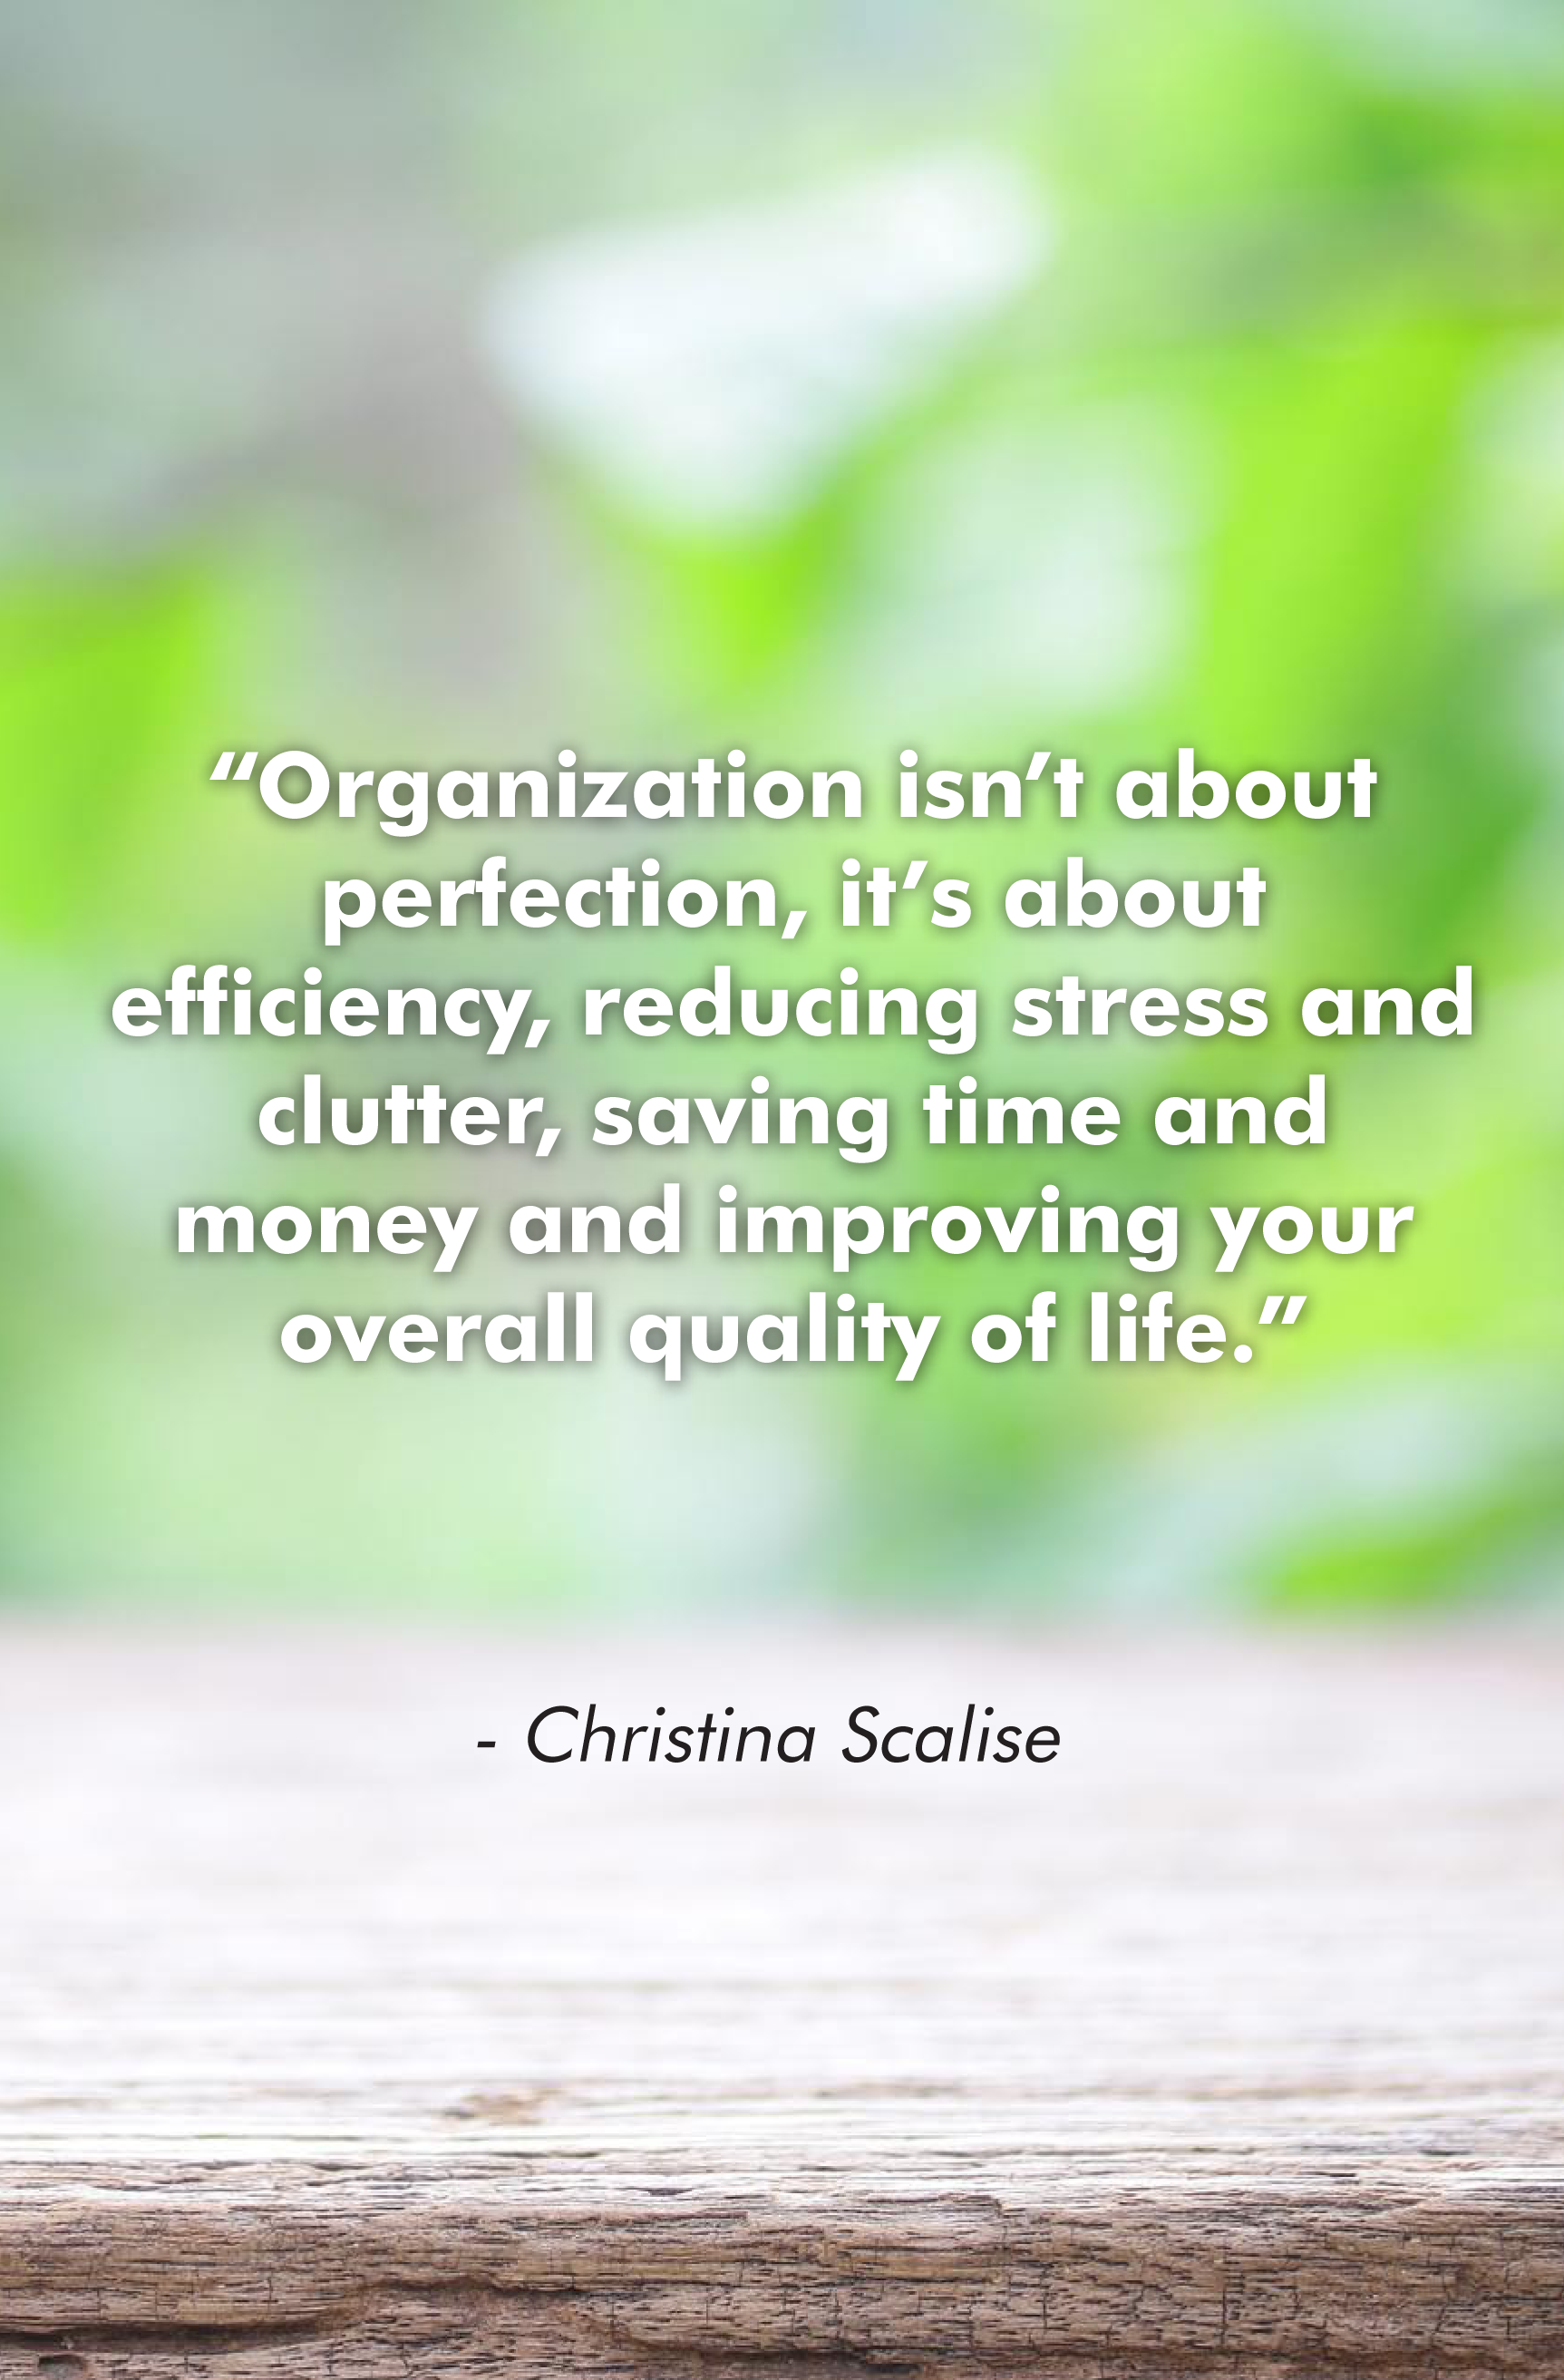 "Organization isn't about perfection, it's about efficiency, reducing stress and clutter, saving time and money and improving your overall quality of life.”